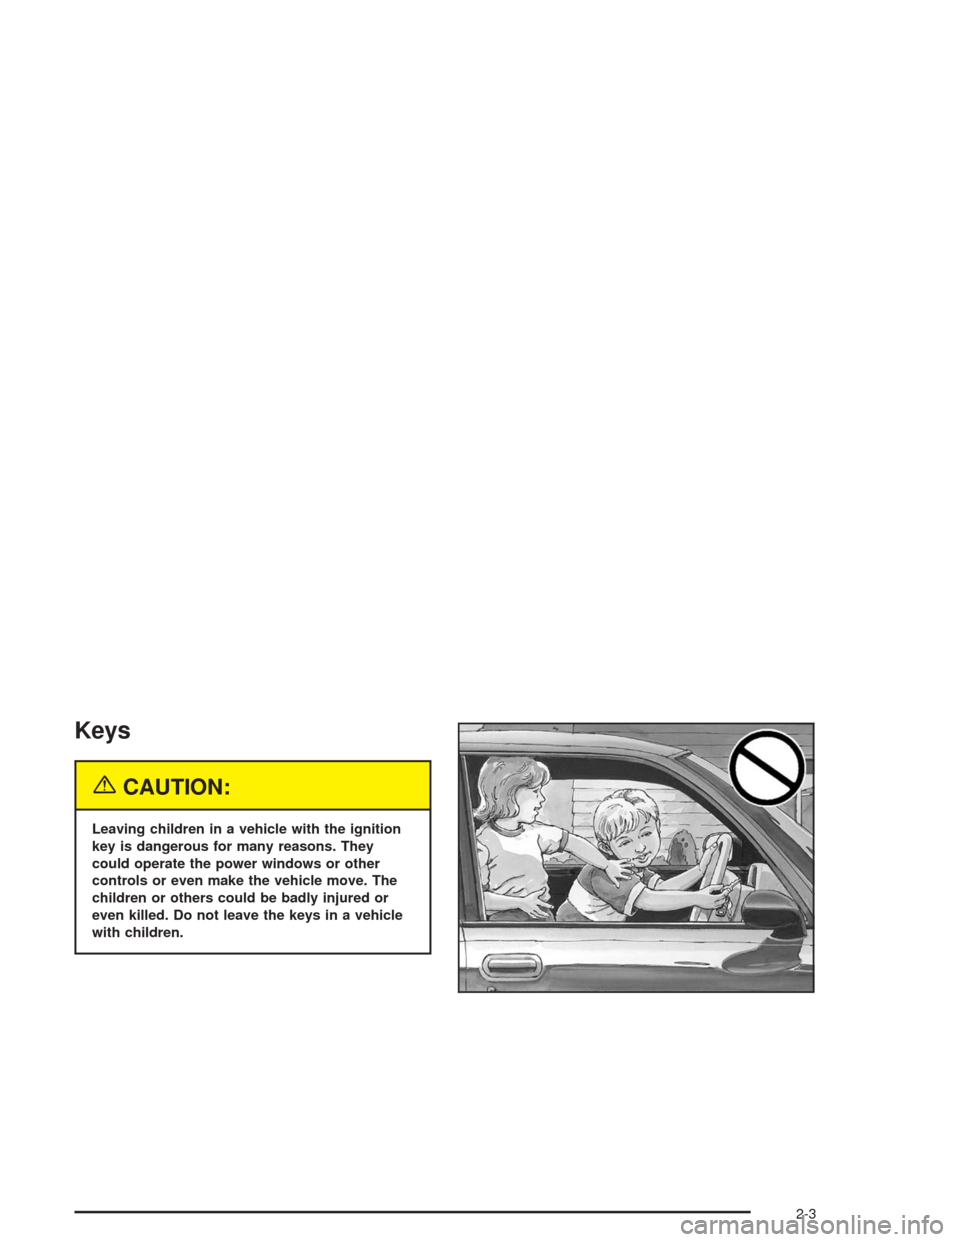 Oldsmobile Bravada 2004  s Repair Manual Keys
{CAUTION:
Leaving children in a vehicle with the ignition
key is dangerous for many reasons. They
could operate the power windows or other
controls or even make the vehicle move. The
children or 